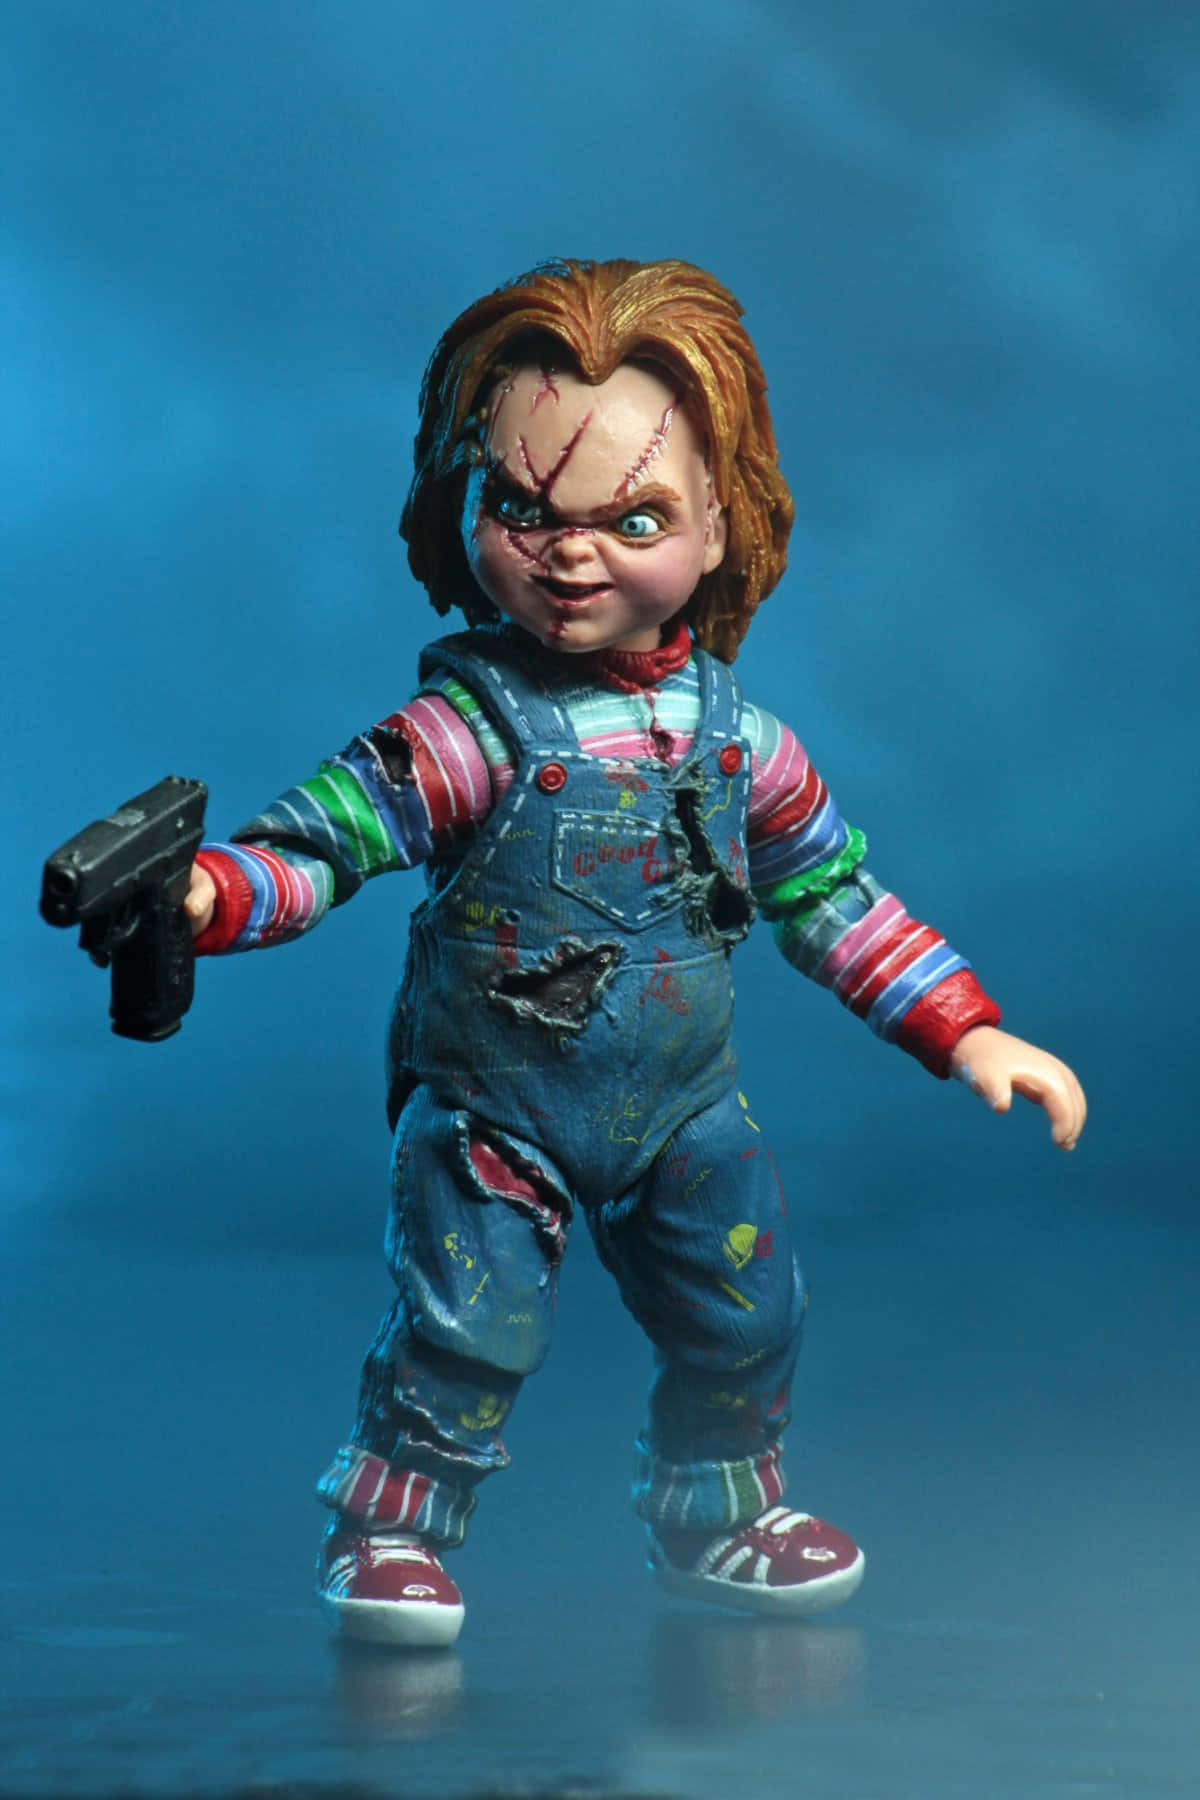 Don’t Let the Adorable Face Fool You - Chucky Is Here and He's Out for Revenge